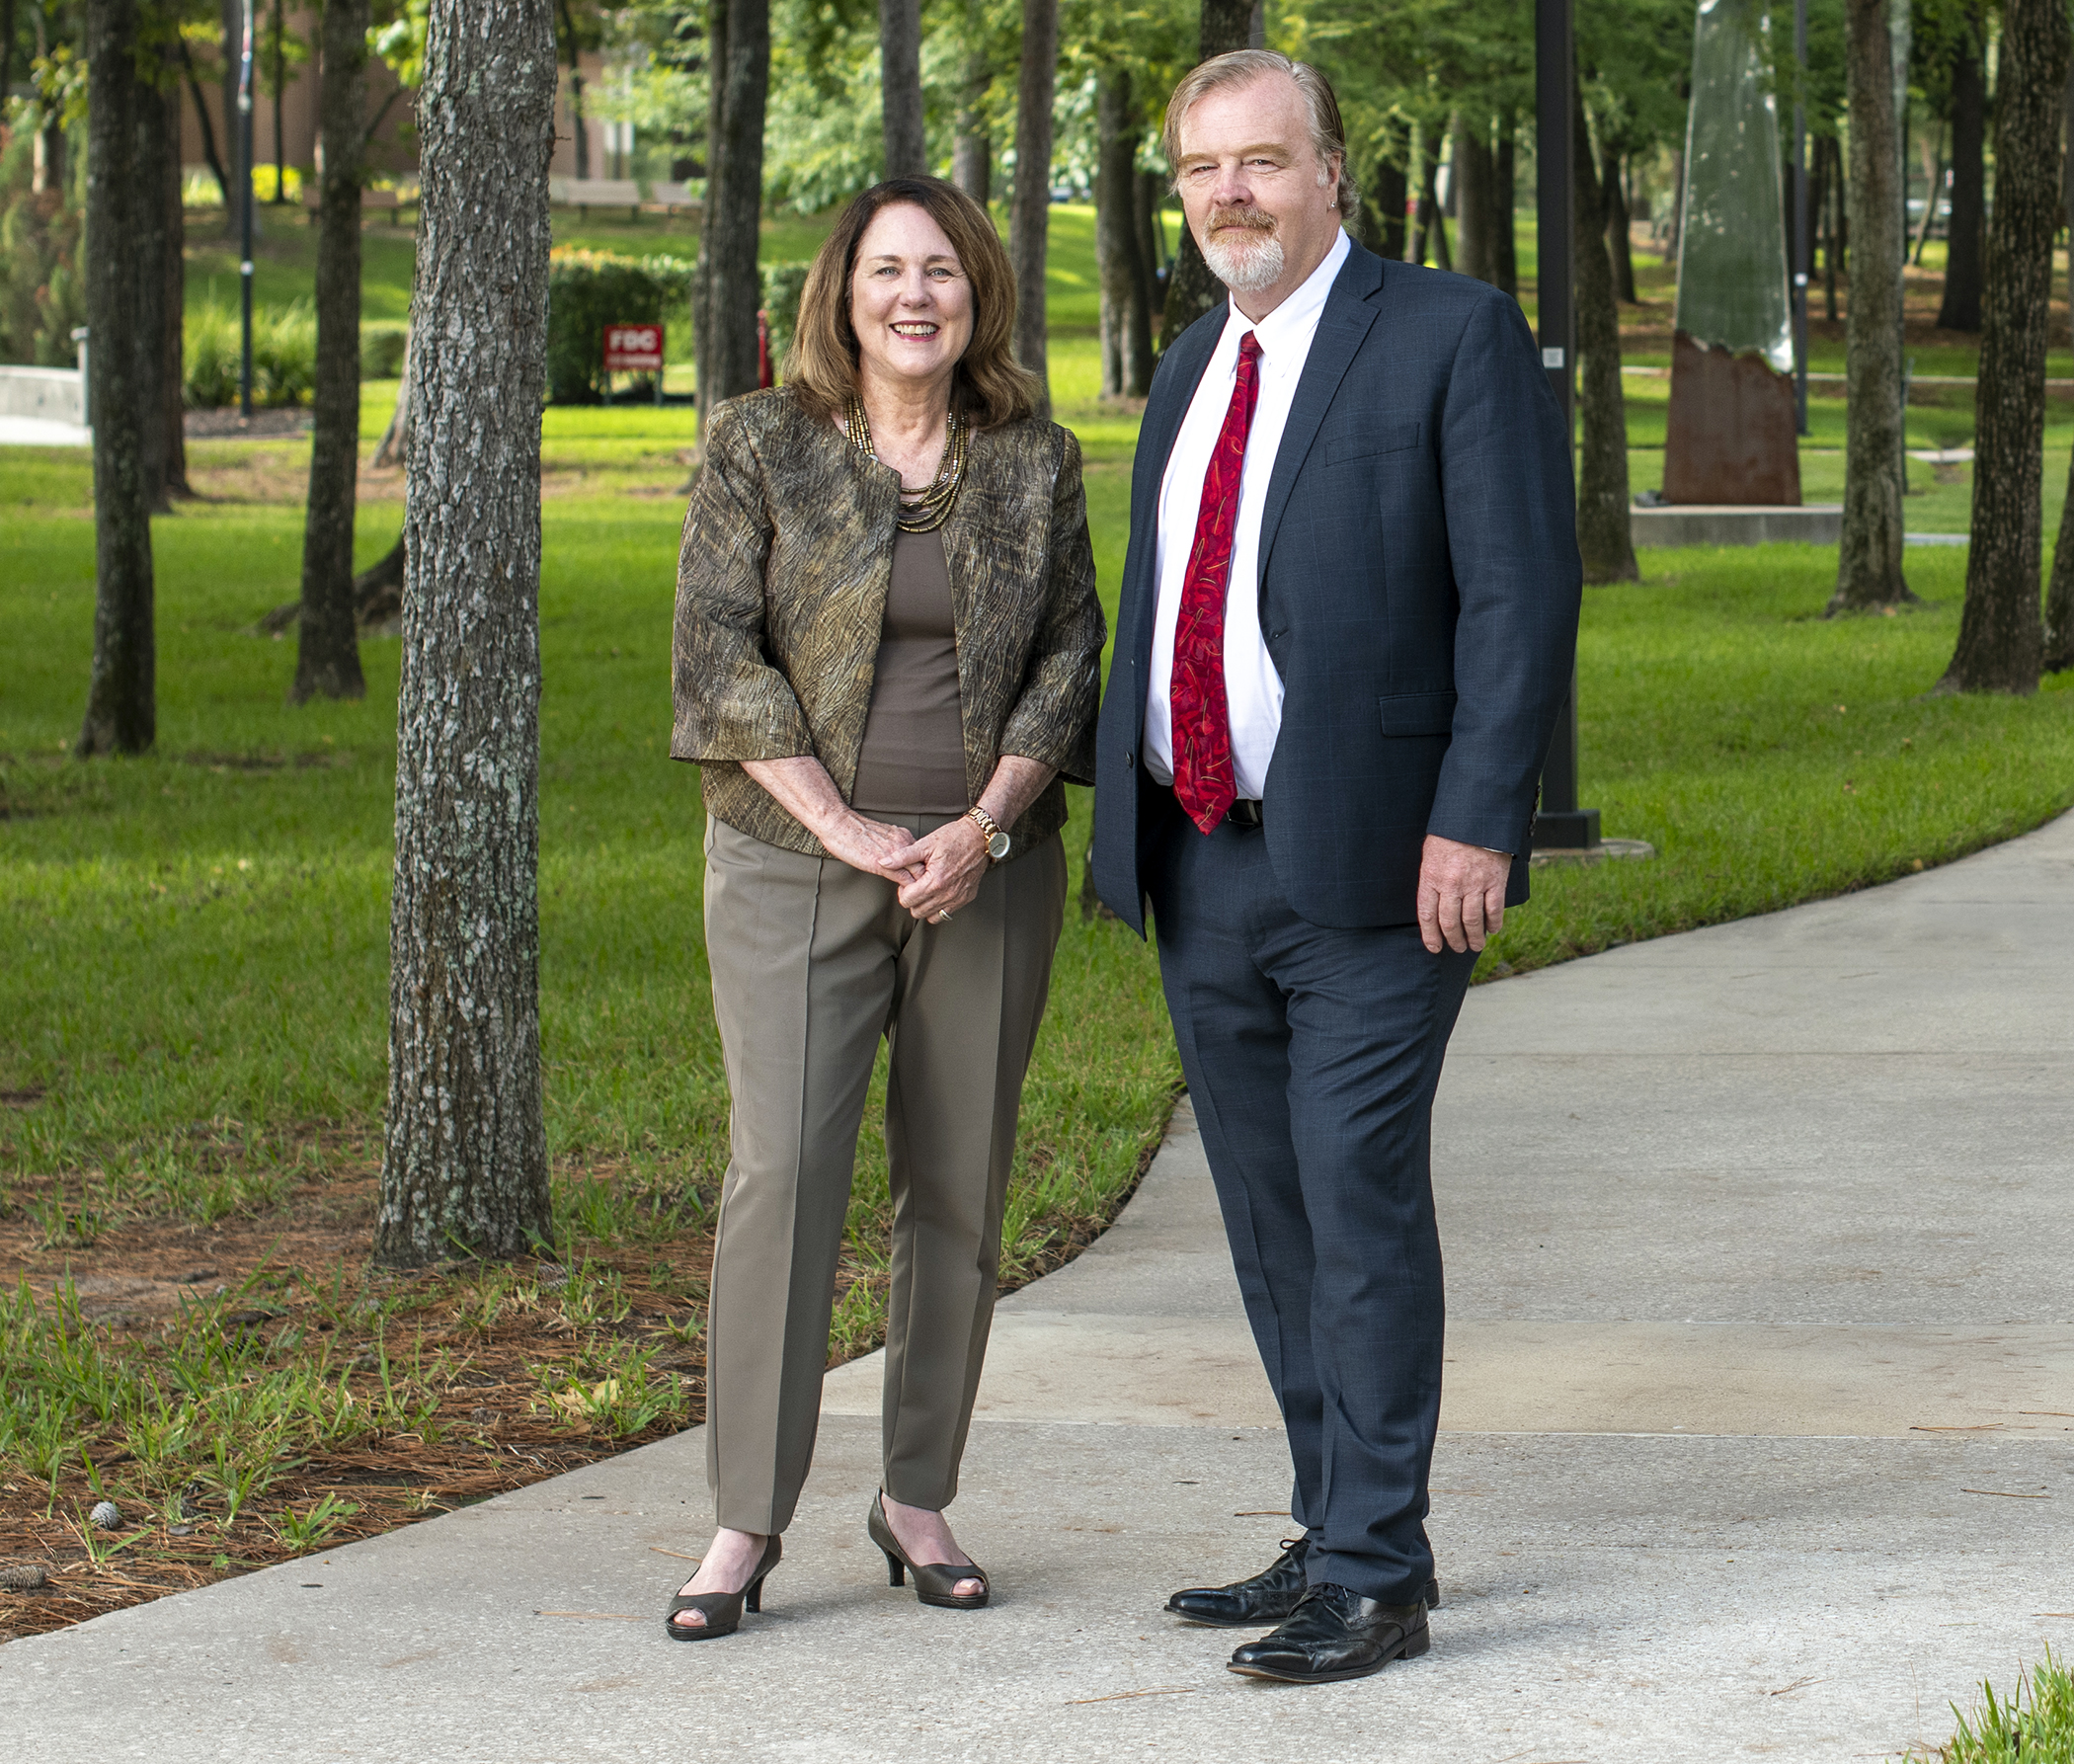 LSC Fulbright Scholar Winners Claire Phillips, Ph.D., LSC-CyFair Science and Engineering Instruction Dean and John Theis, Ph.D., LSC-Kingwood Political Science Professor and Center for Civic Engagement Director